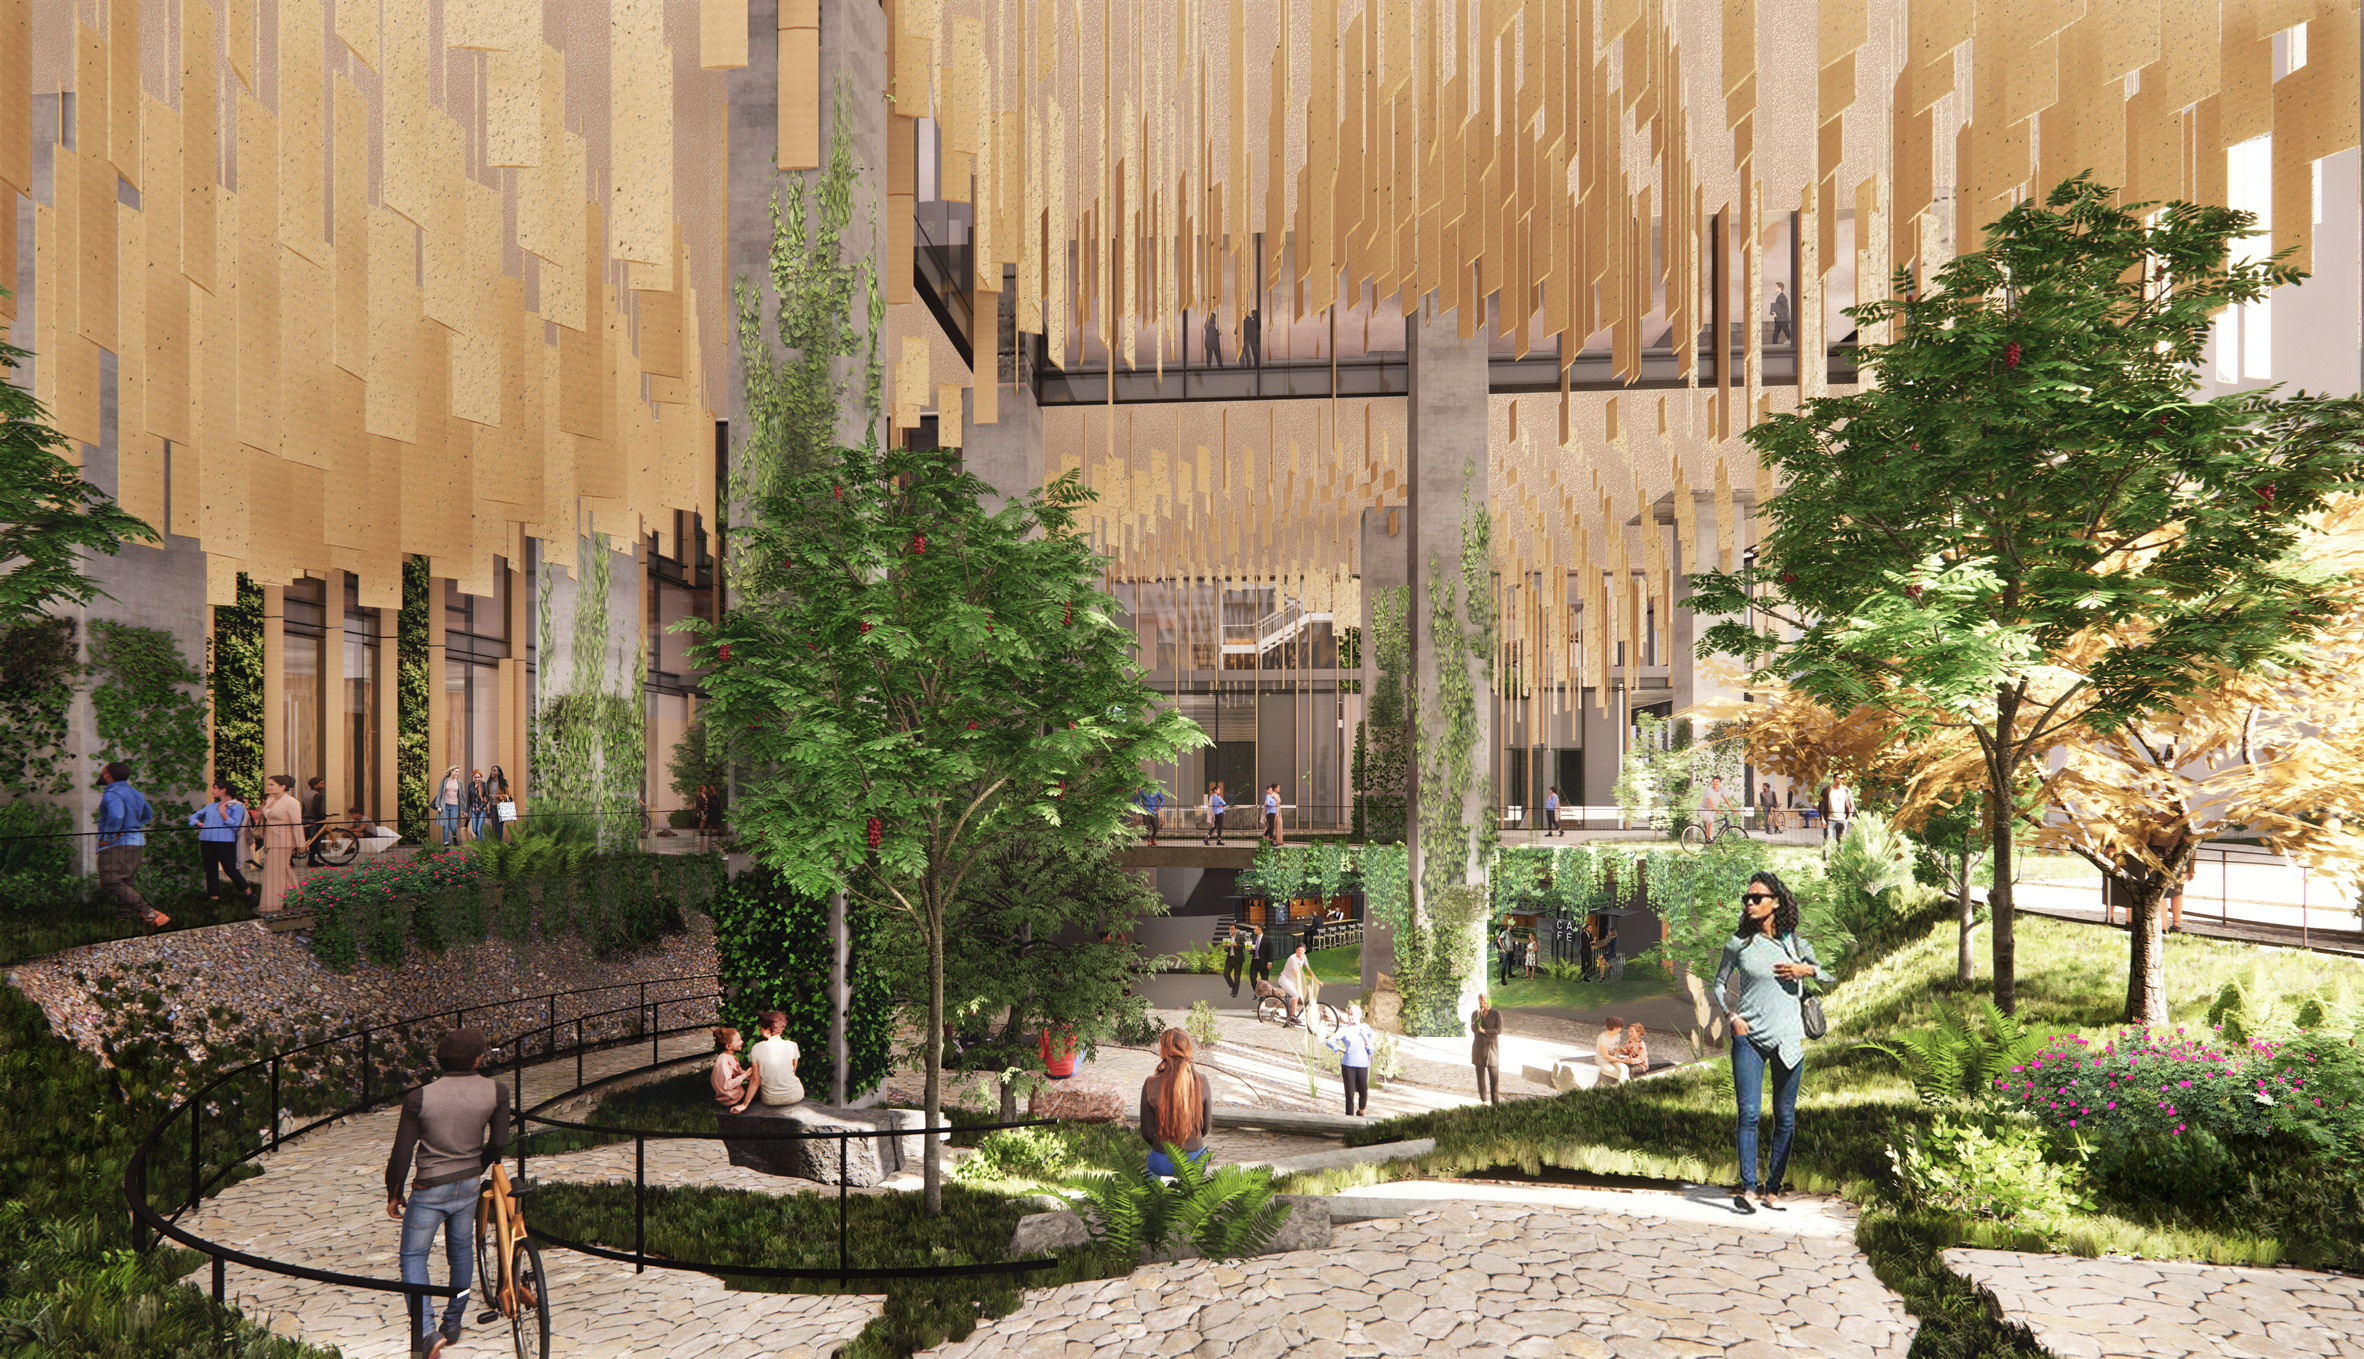 Kengo Kuma designs plant-covered Silicon Valley building with